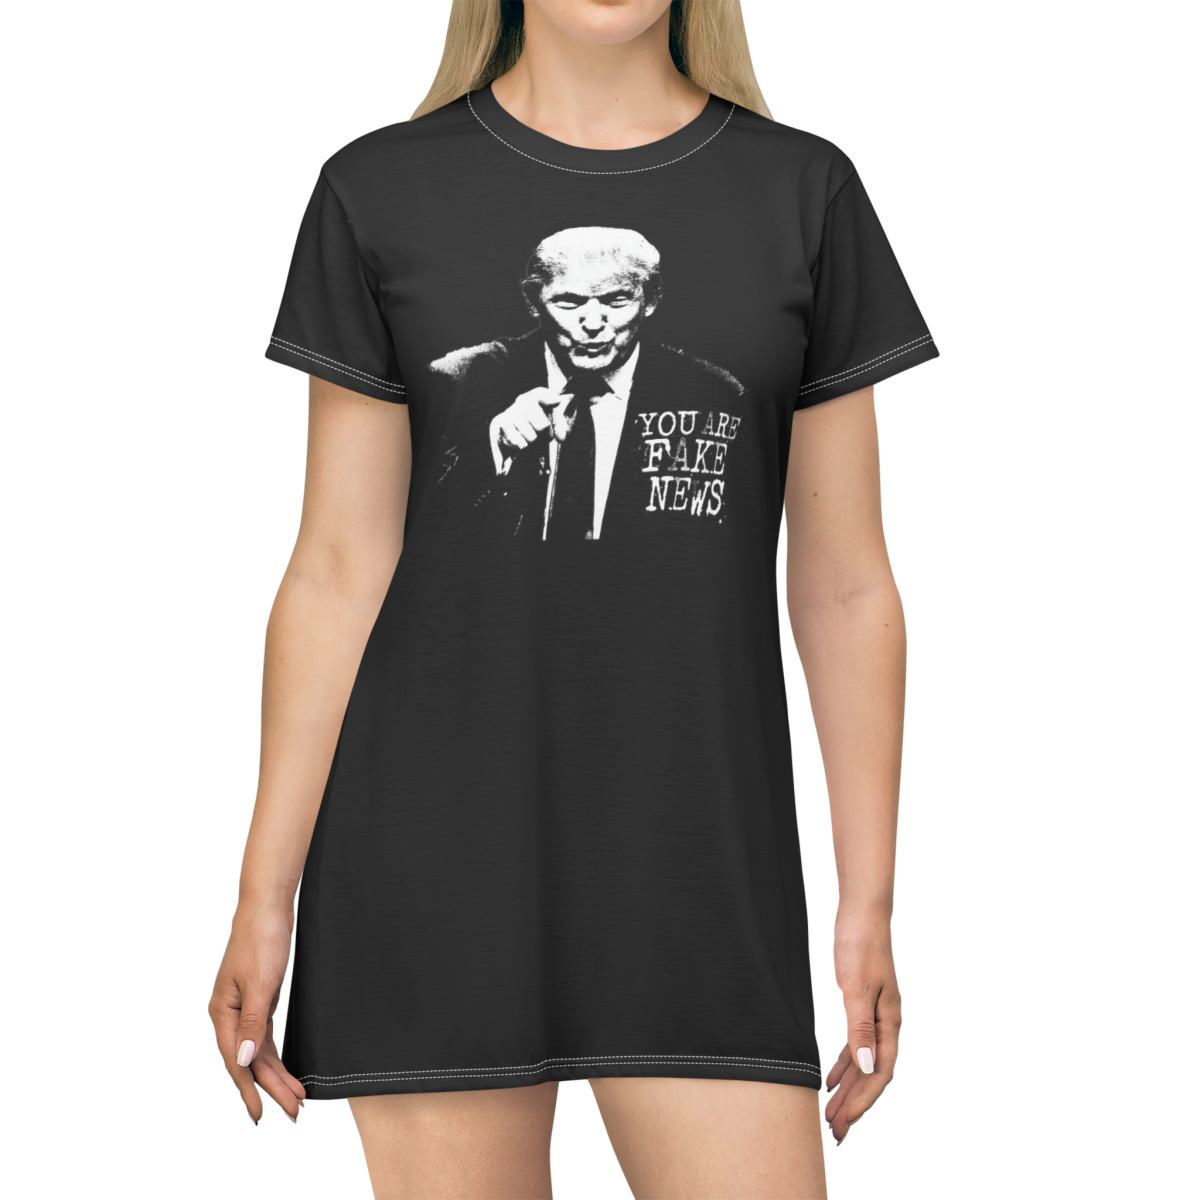 Donald Trump You are Fake News T-shirt Dress by Trump is Punk Rock